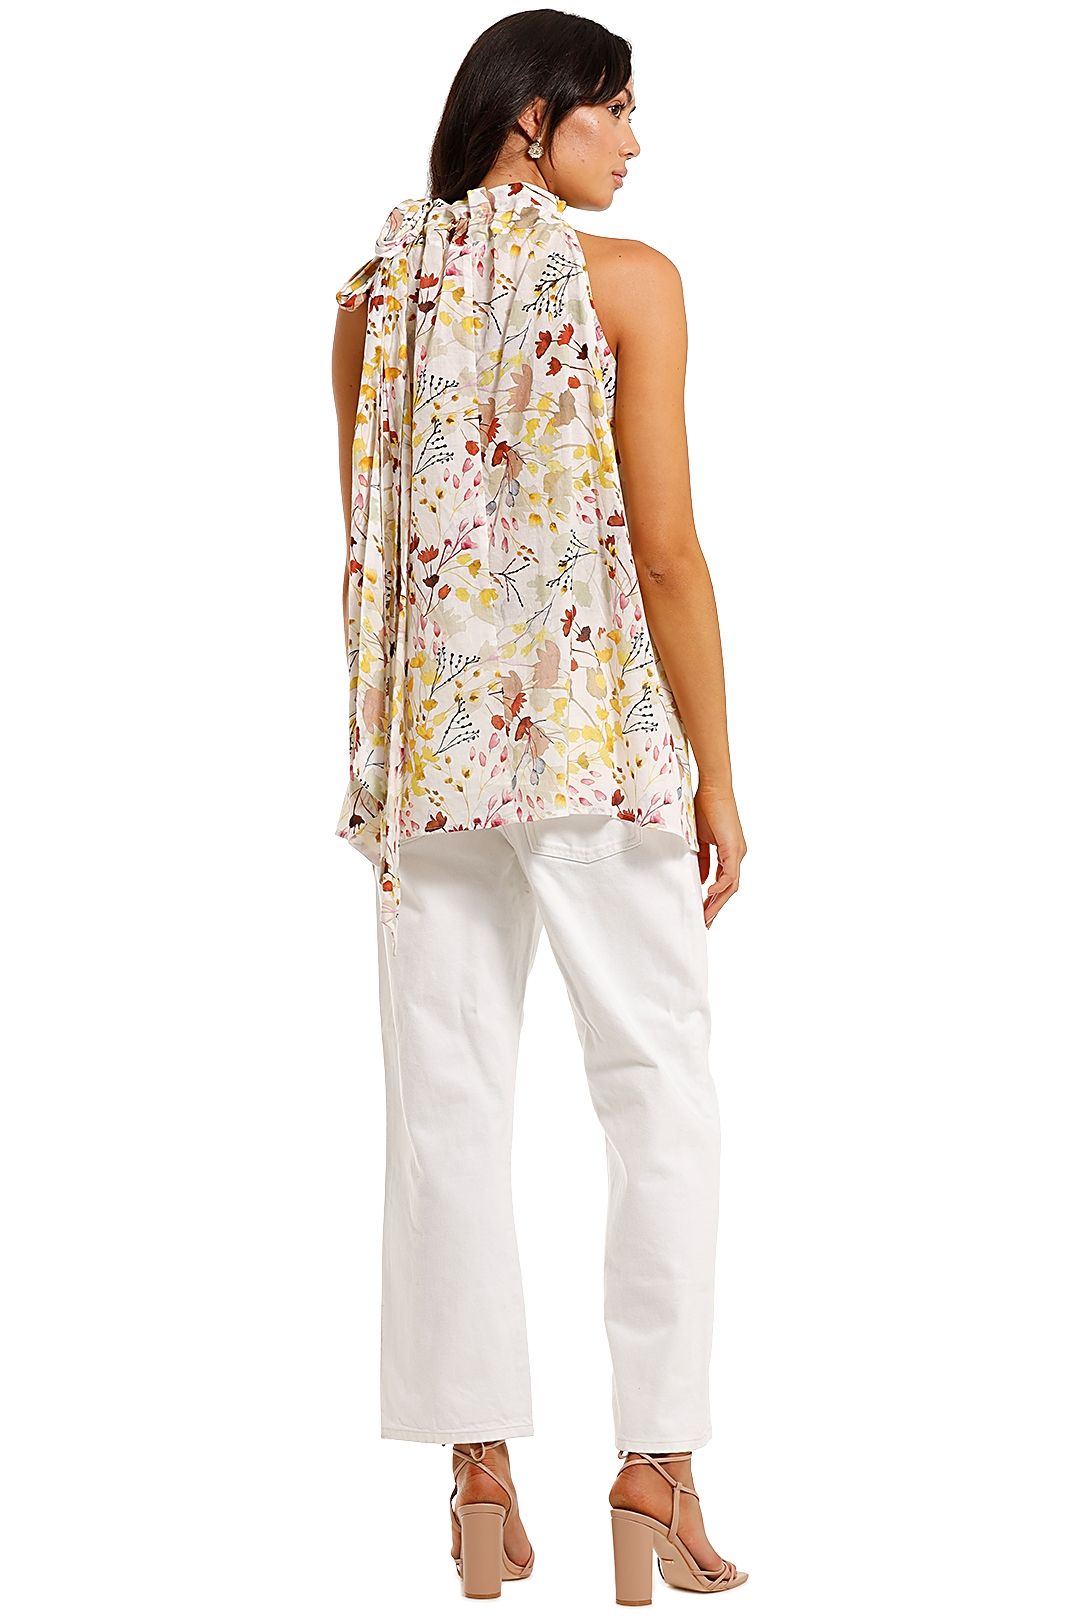 Morrison Andreas Top Floral